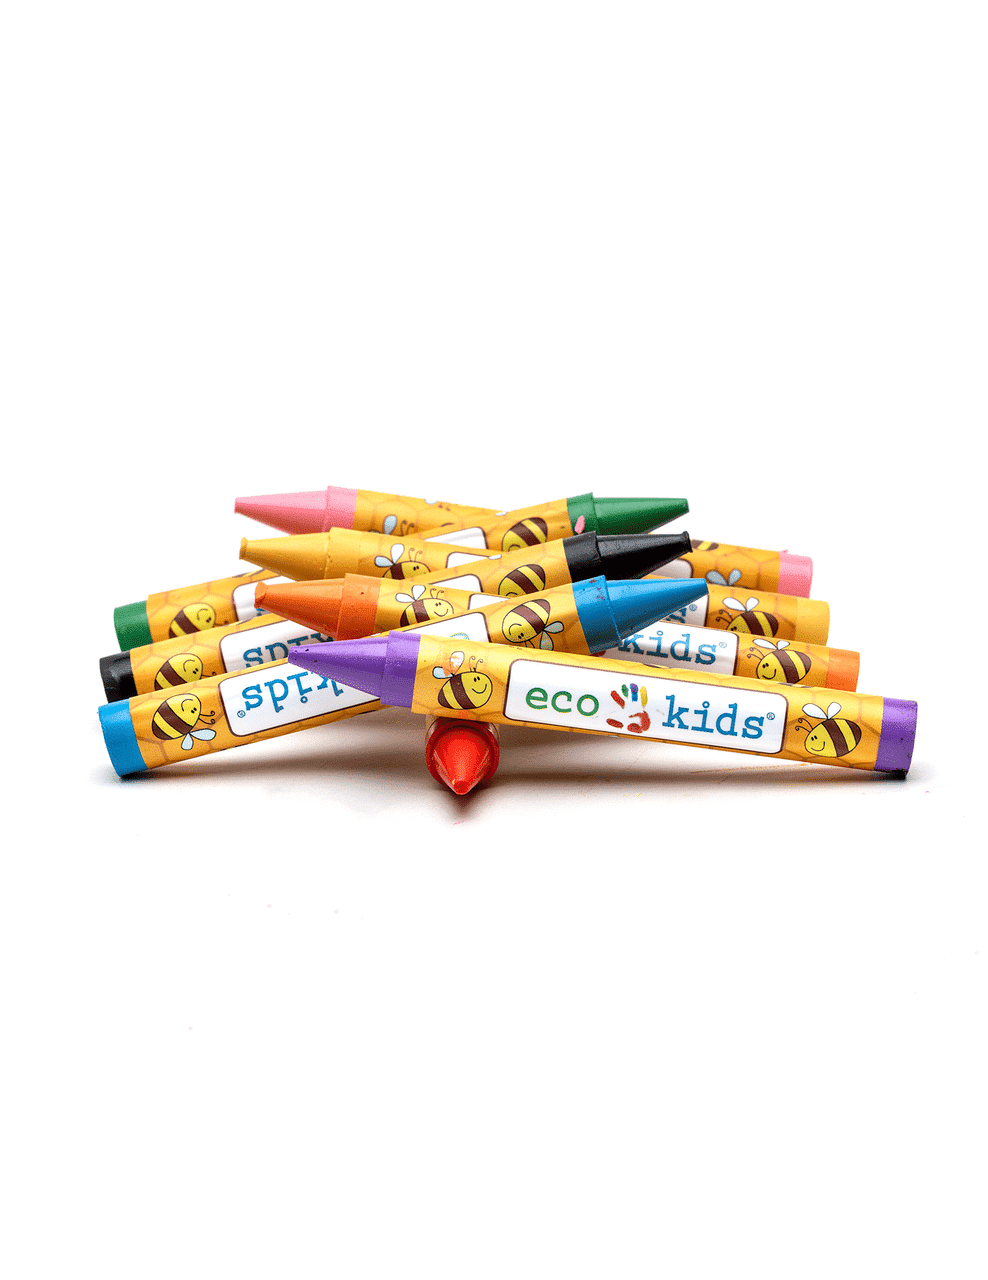 https://gimmethegoodstuff.org/wp-content/uploads/Eco-Kids-Large-Beeswax-Crayons-from-Gimme-the-Good-Stuff-1.png